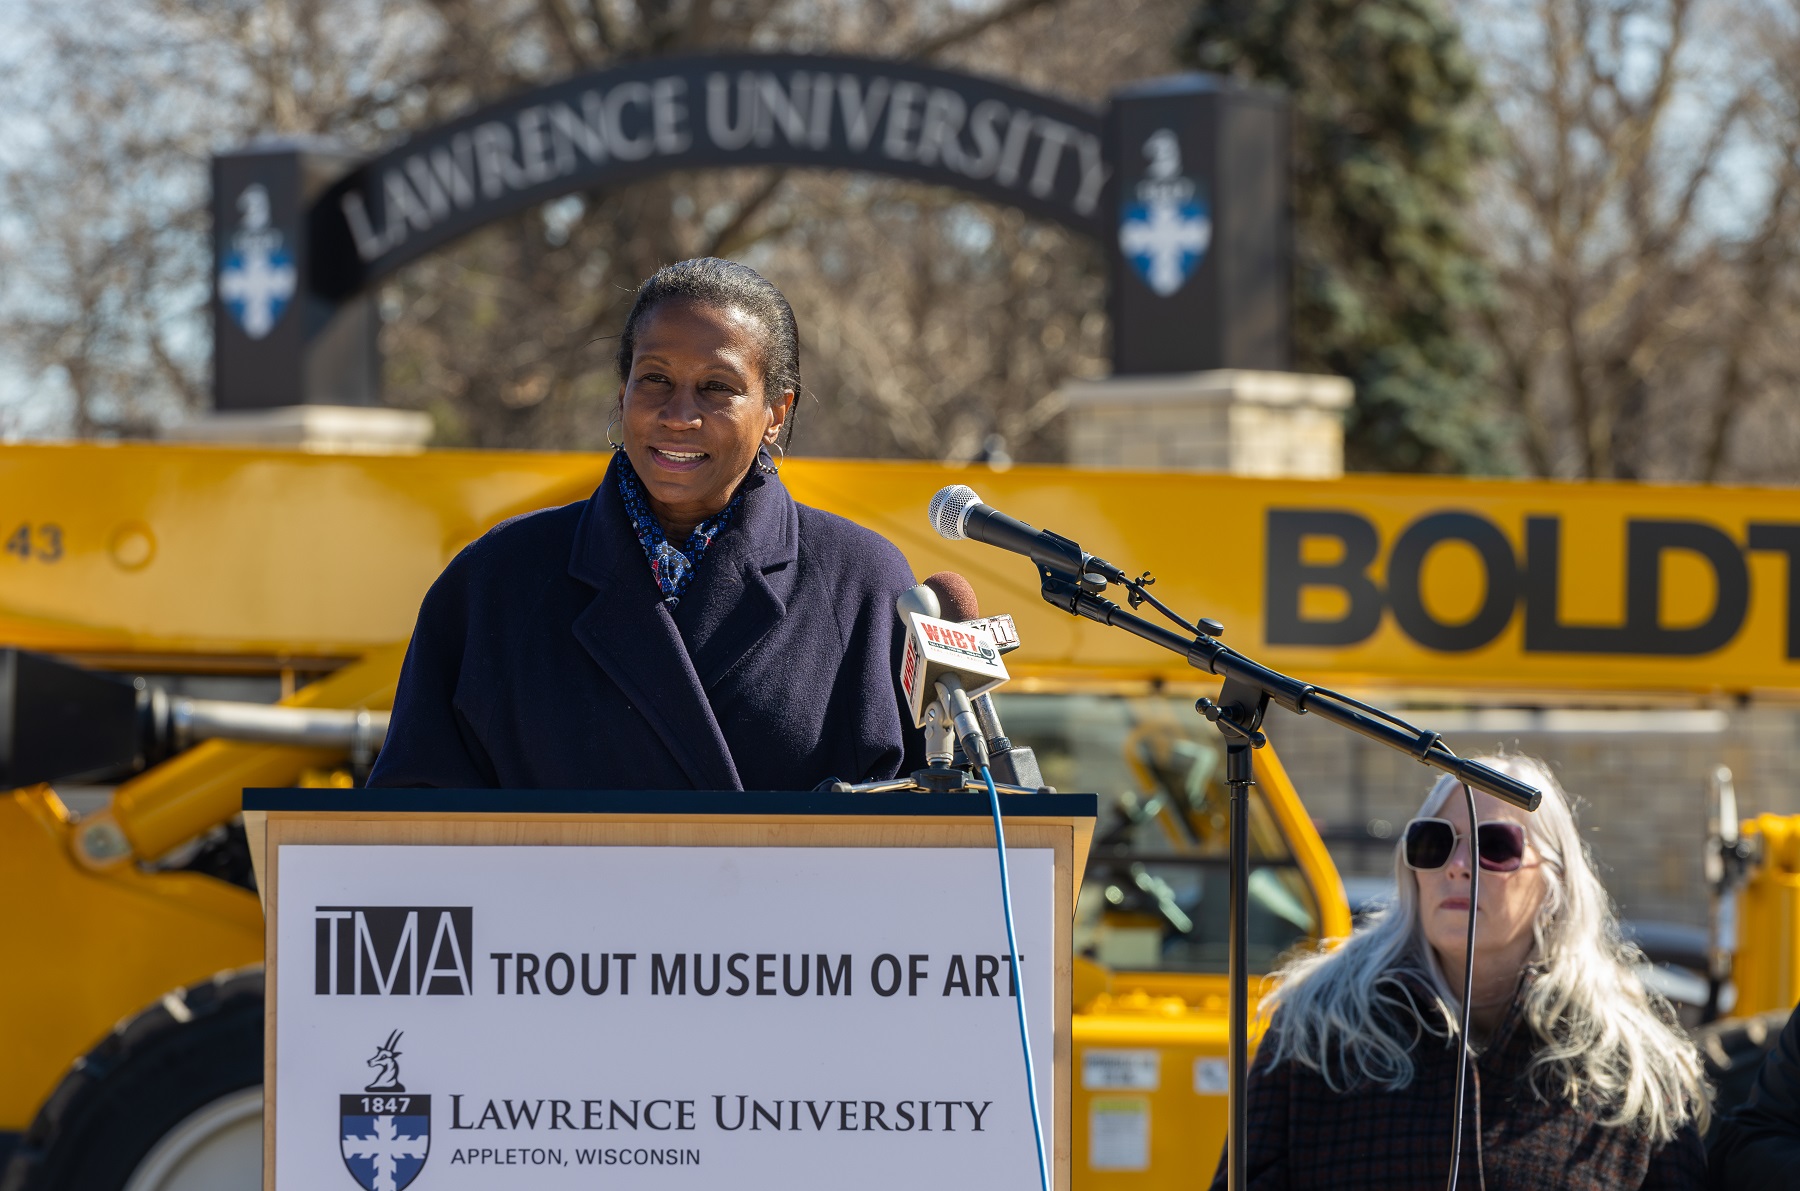 Lawrence University President Laurie A. Carter speaks at the podium during the groundbreaking ceremony. The Lawrence Arch is in the background across Drew Street.